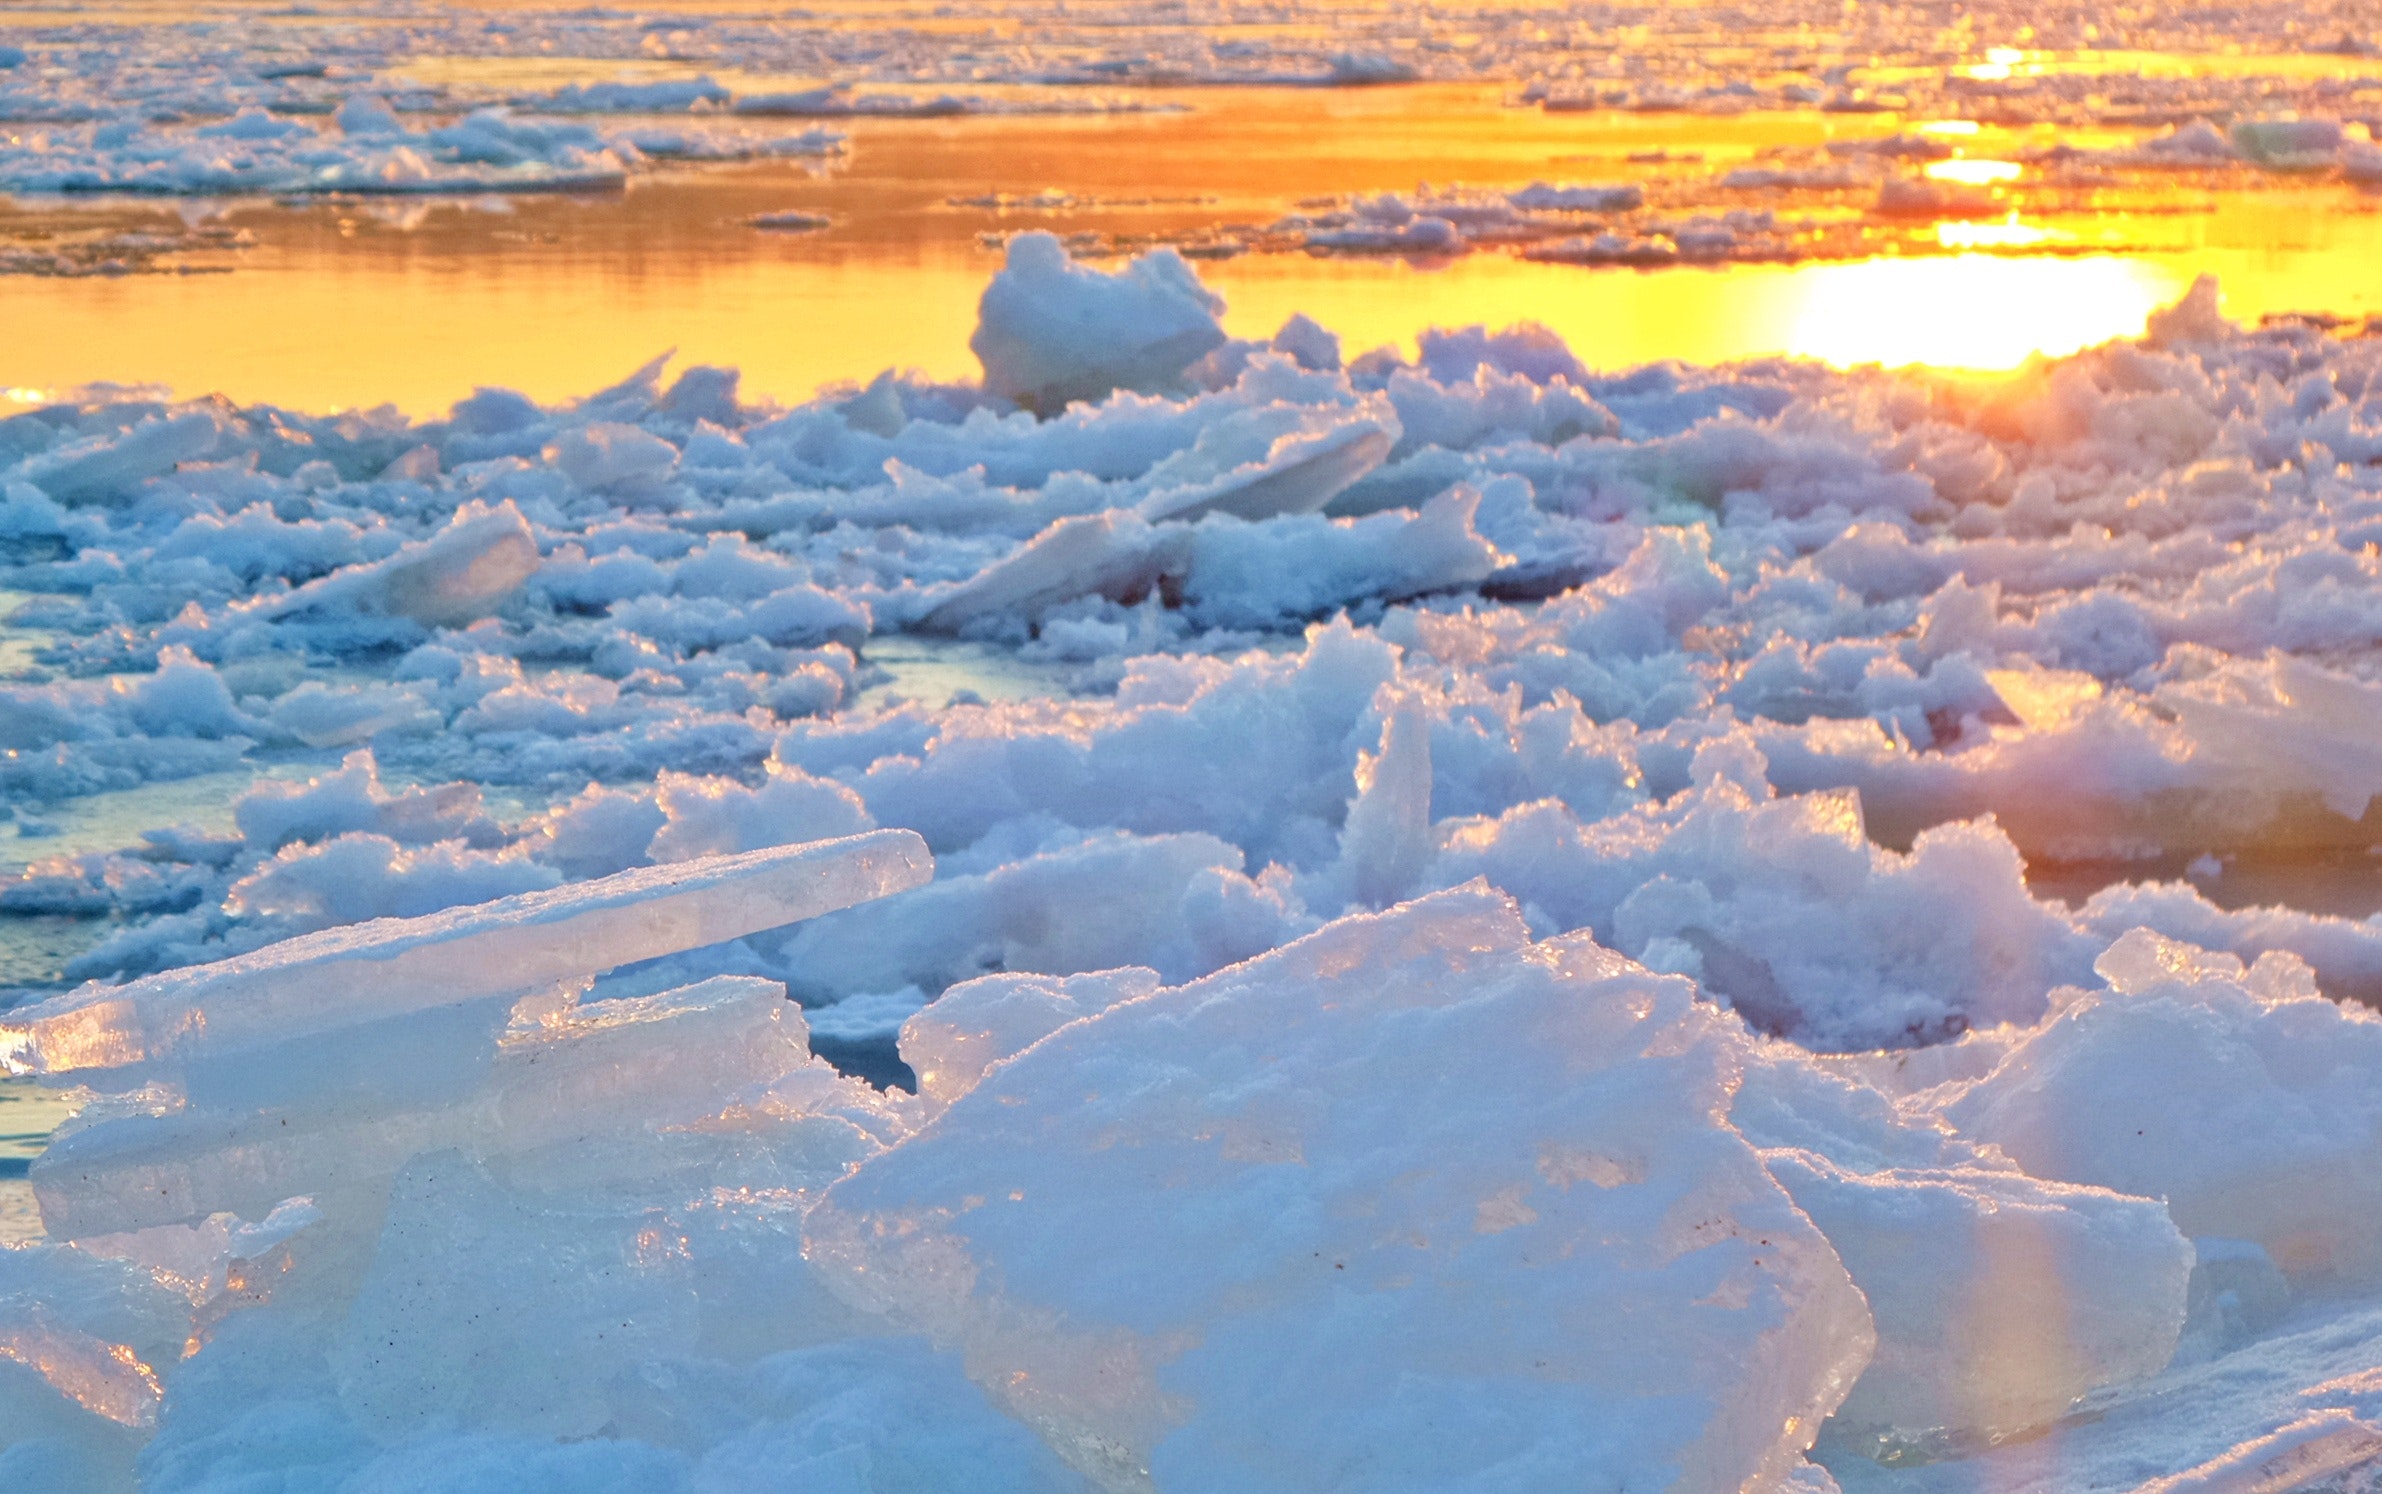 View of Frozen Lake during Sunset, Cold, Reflection, Weather, Water, HQ Photo